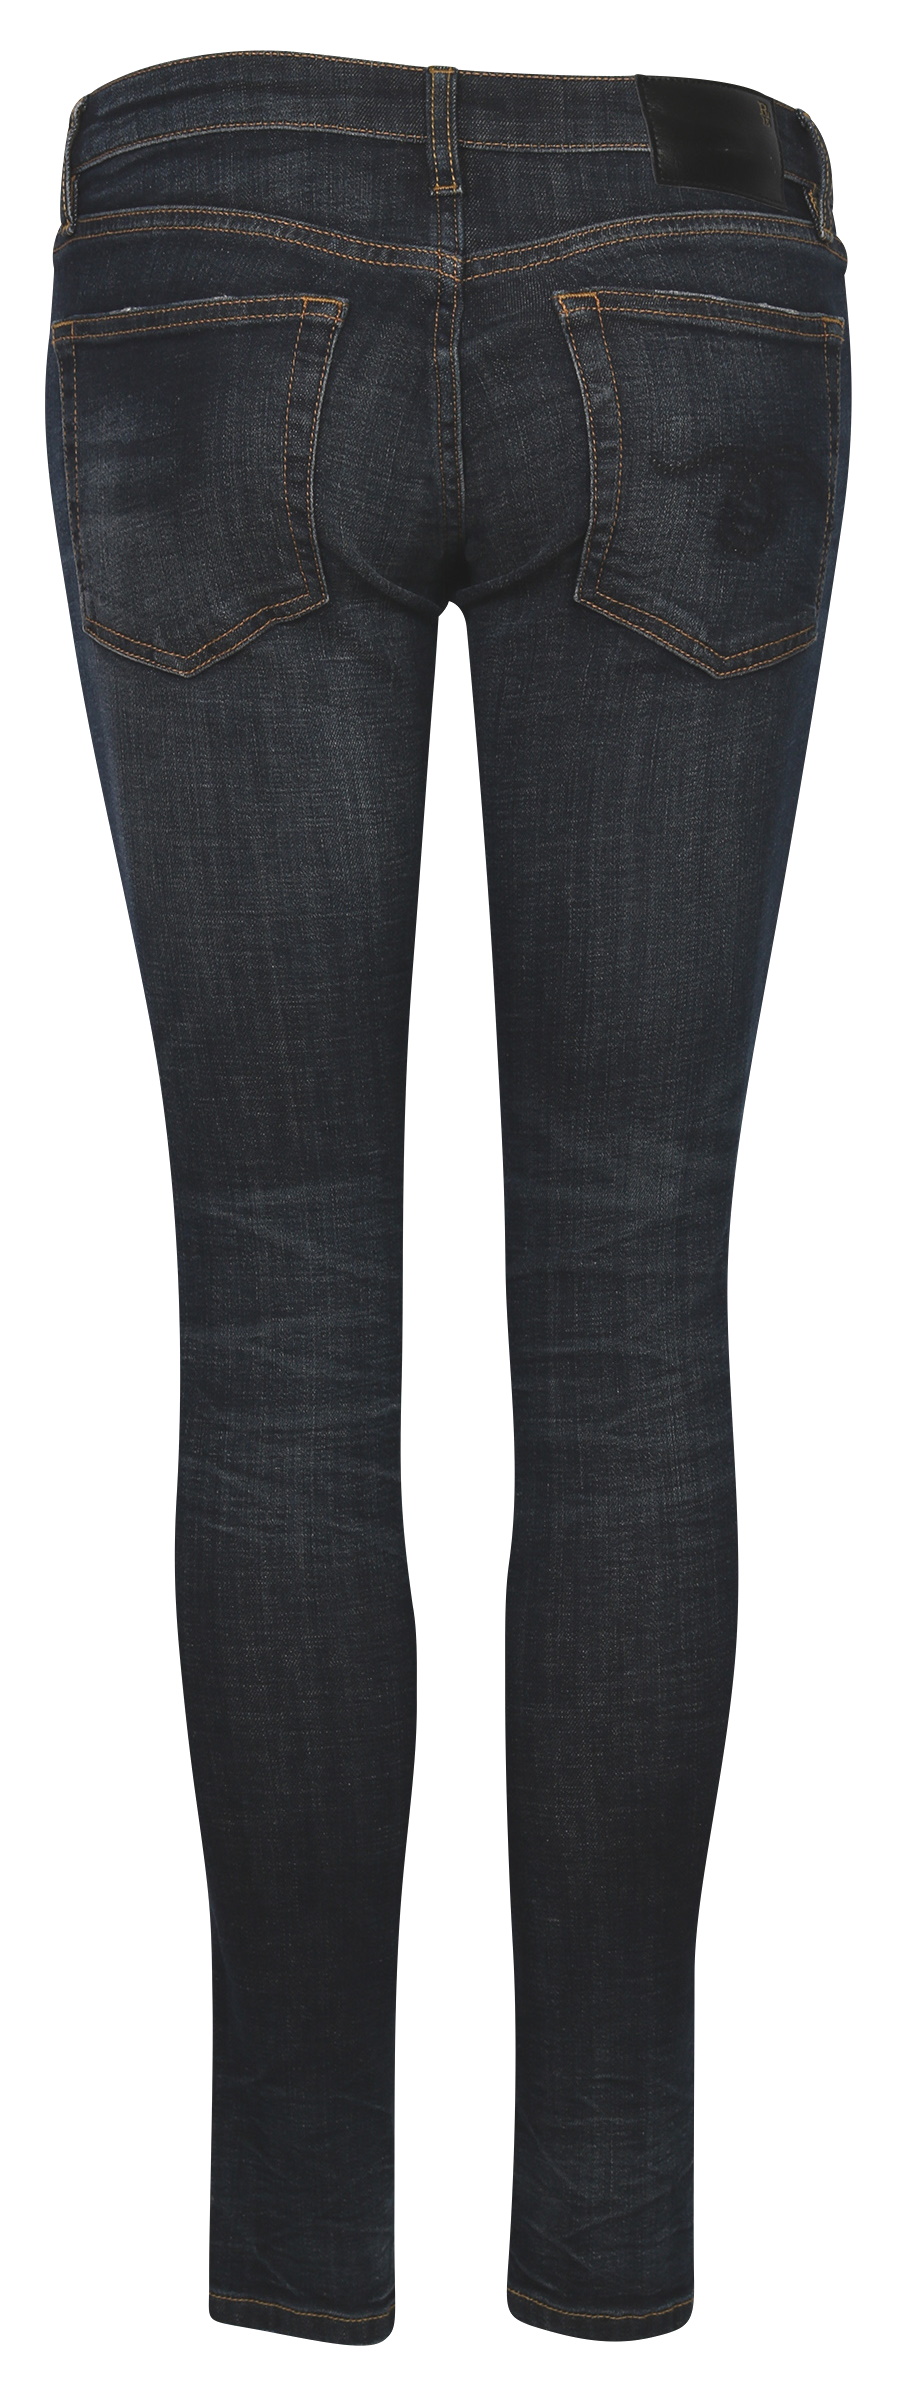 R13 Jeans Kate Howell Blue Washed 28